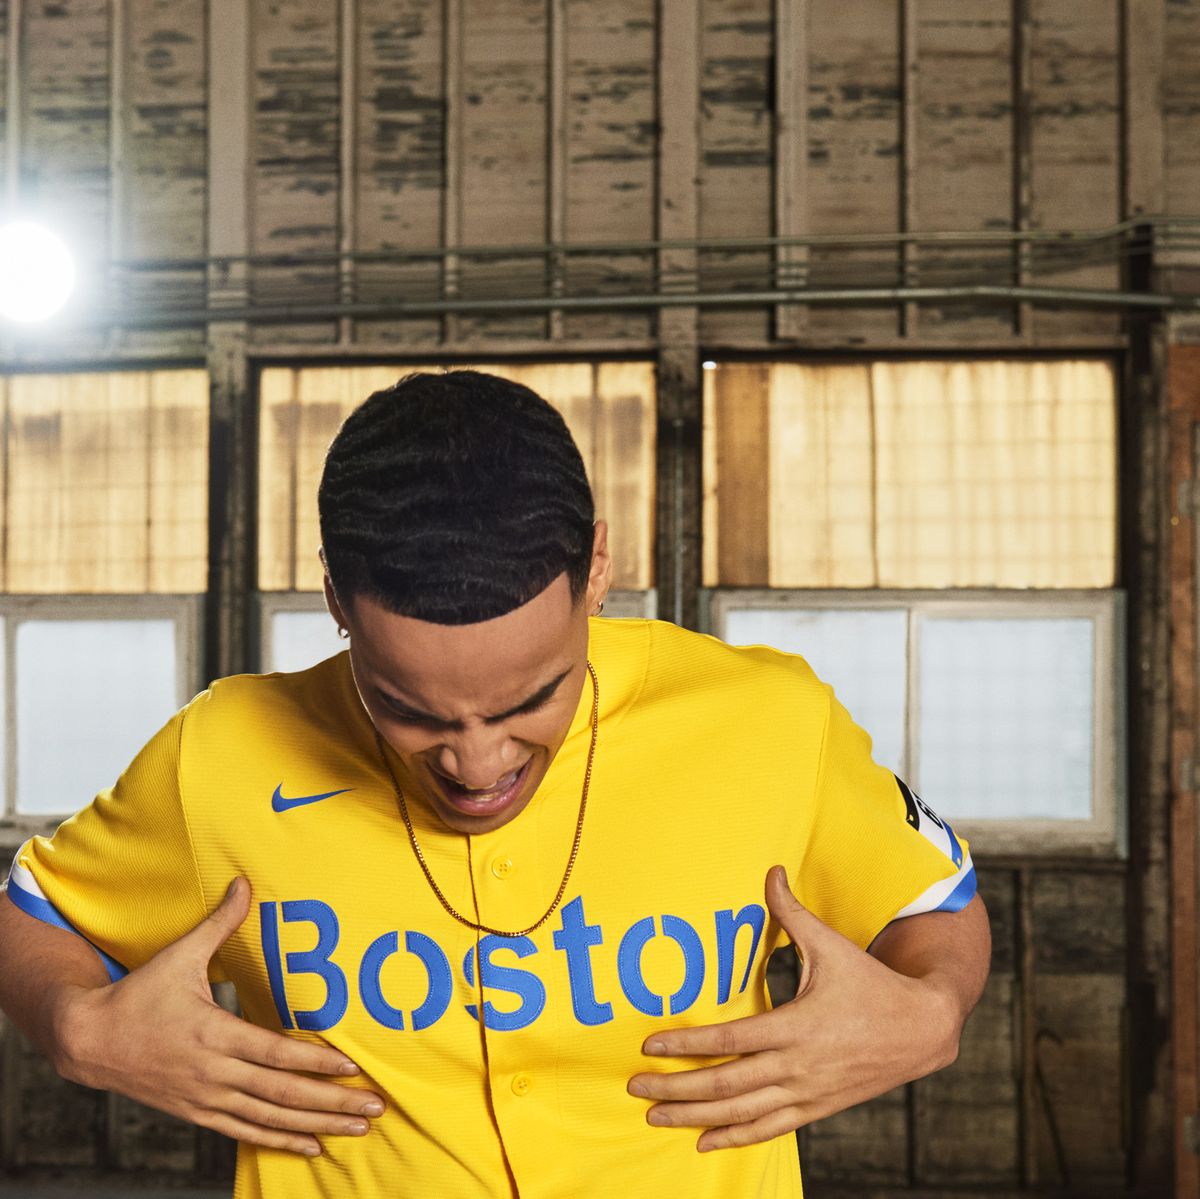 Boston Red Sox unveil new yellow alternate jerseys in nod to Patriots' Day